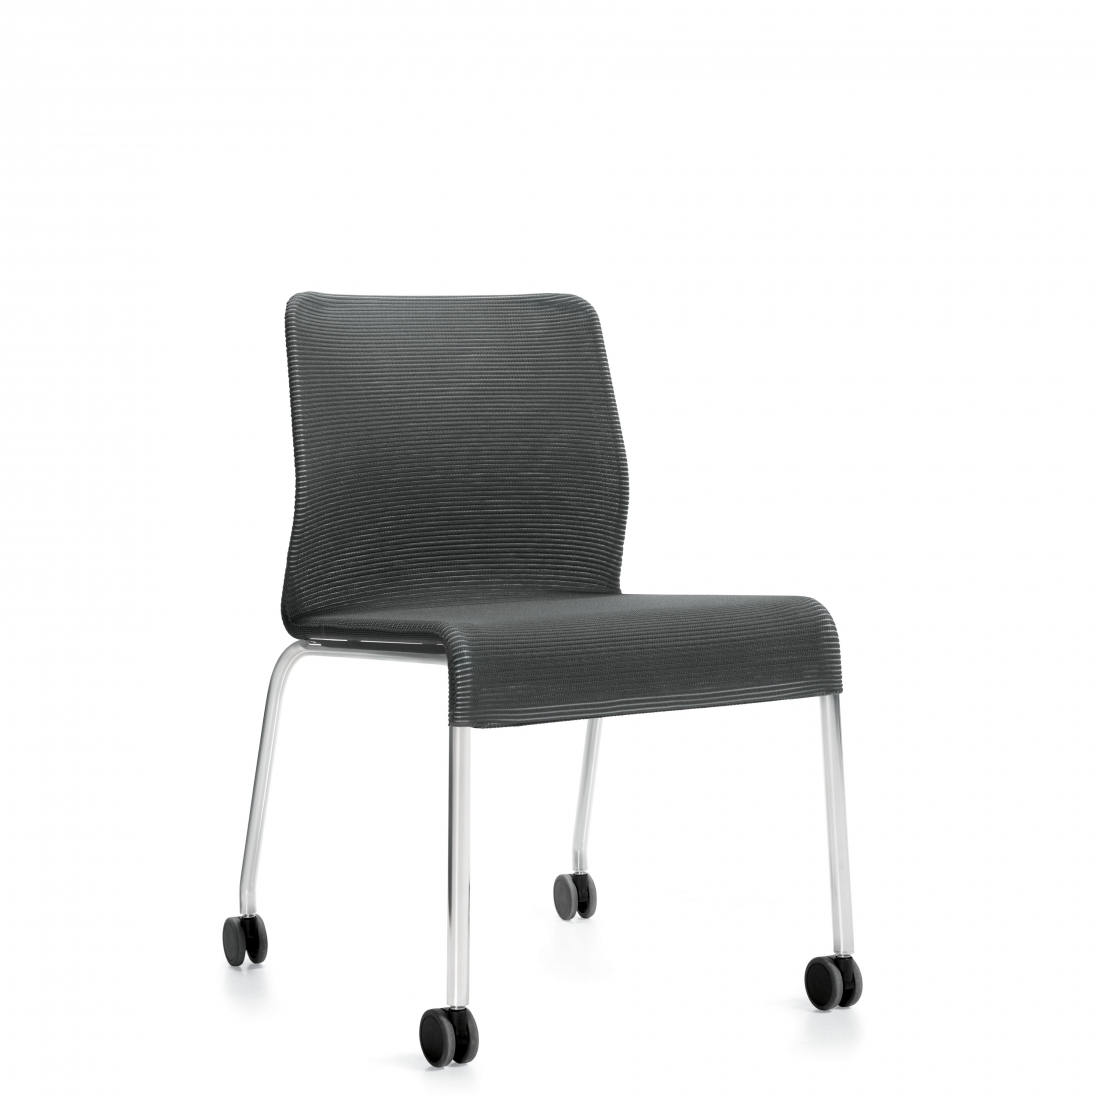 Chair with Casters, Armless